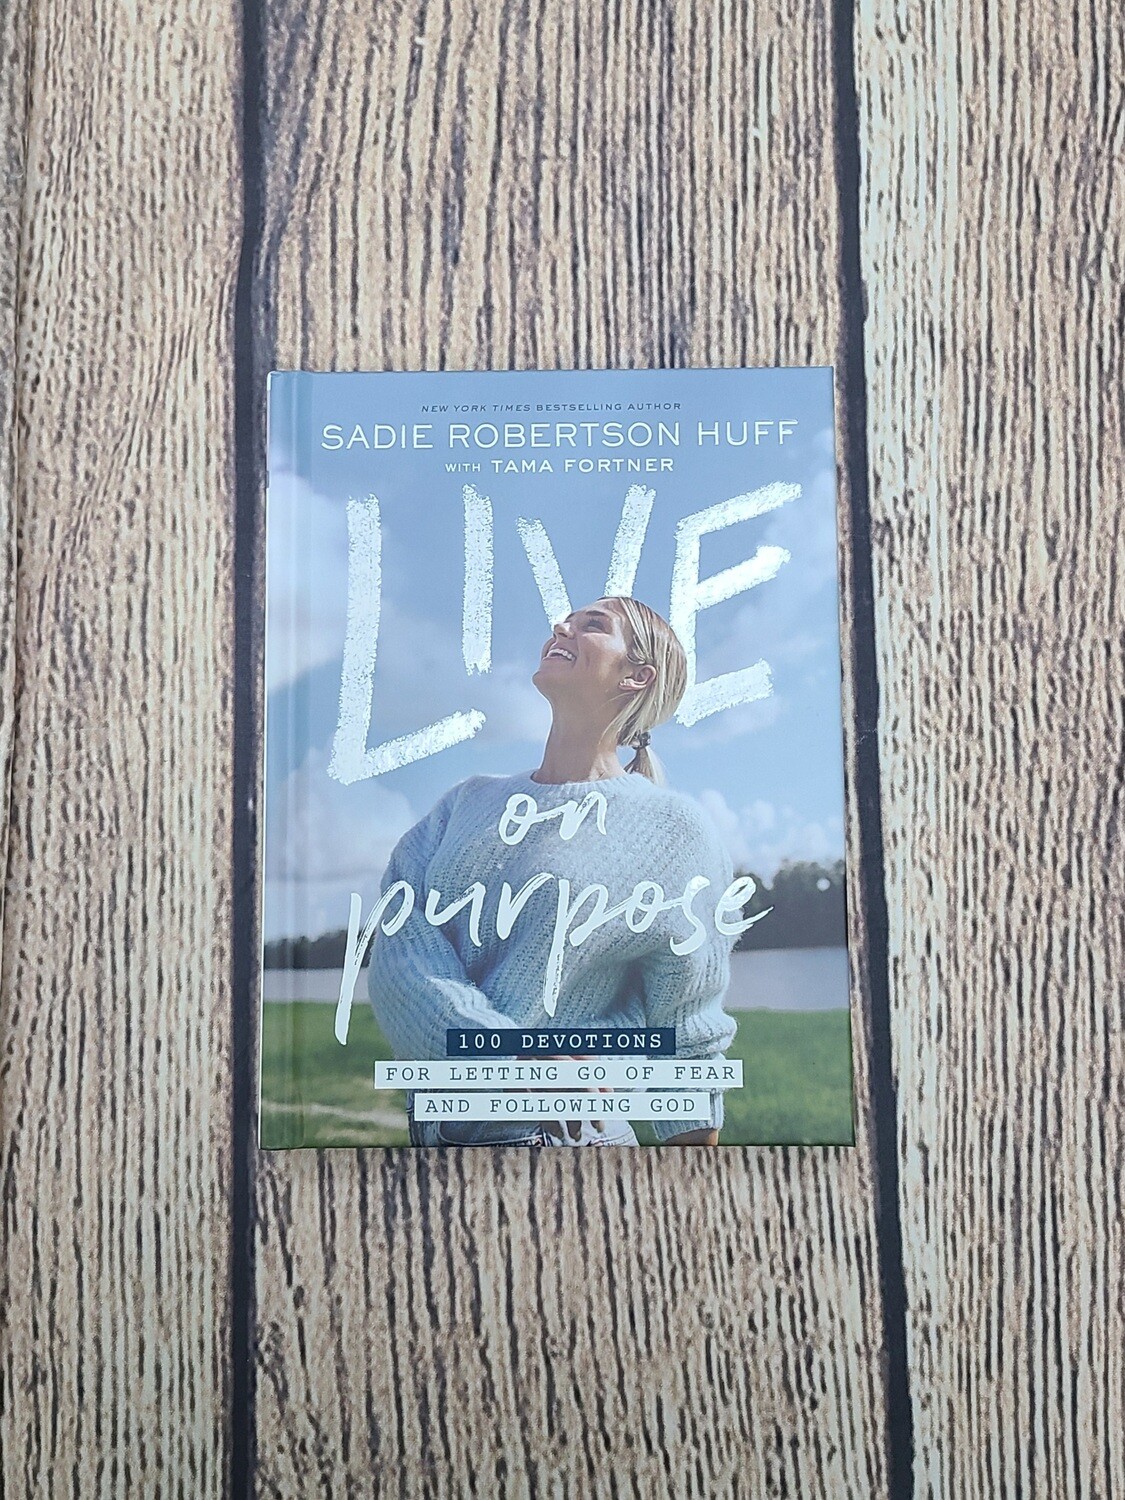 Live on Purpose: 100 Devotions for Letting Go of Fear and Following God by Sadie Robertson Huff with Tama Fortner